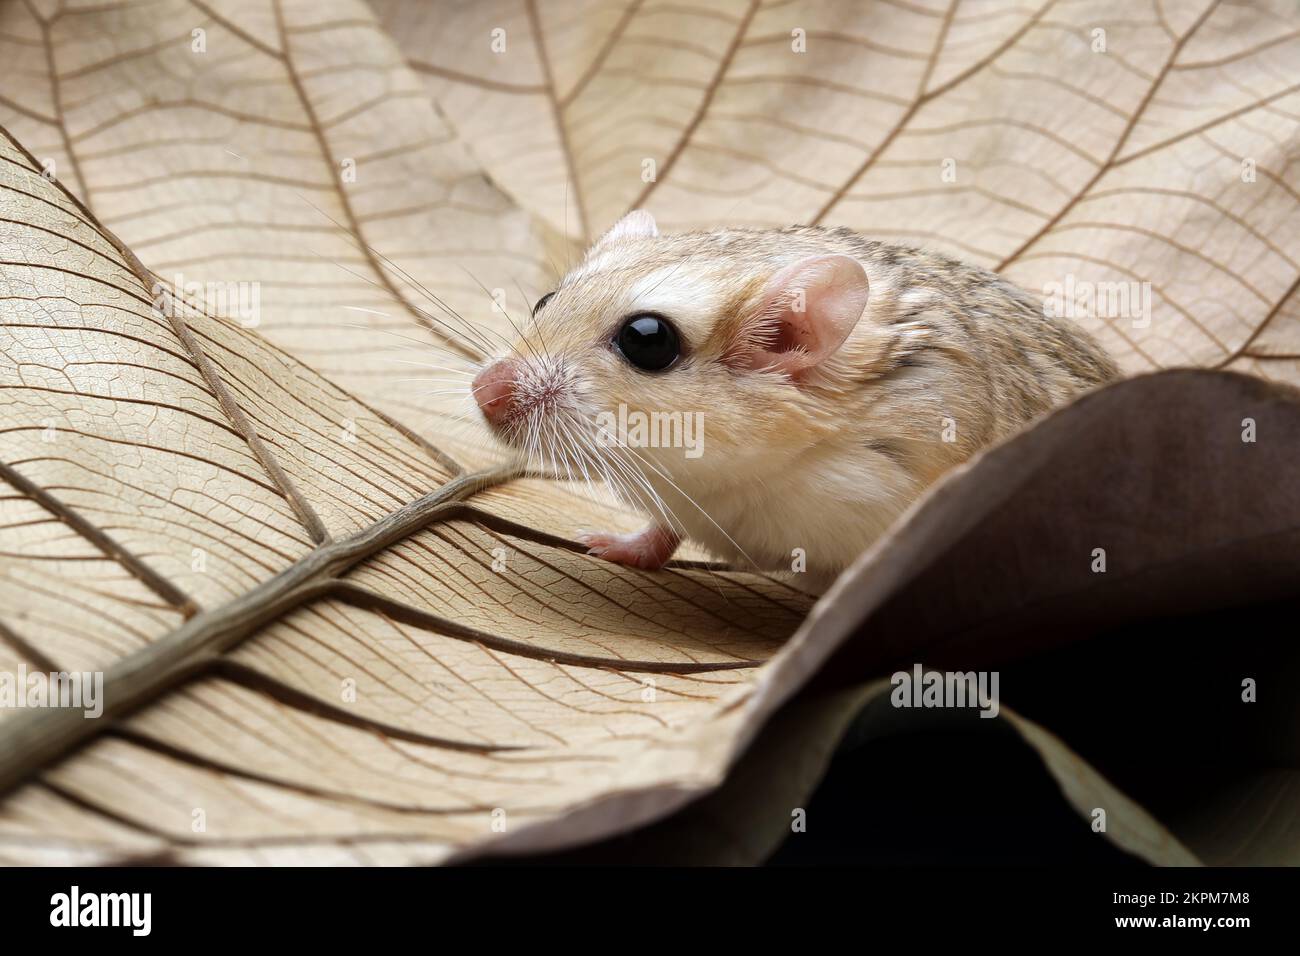 Close-Up of a gerbil on a leaf, Indonesia Stock Photo